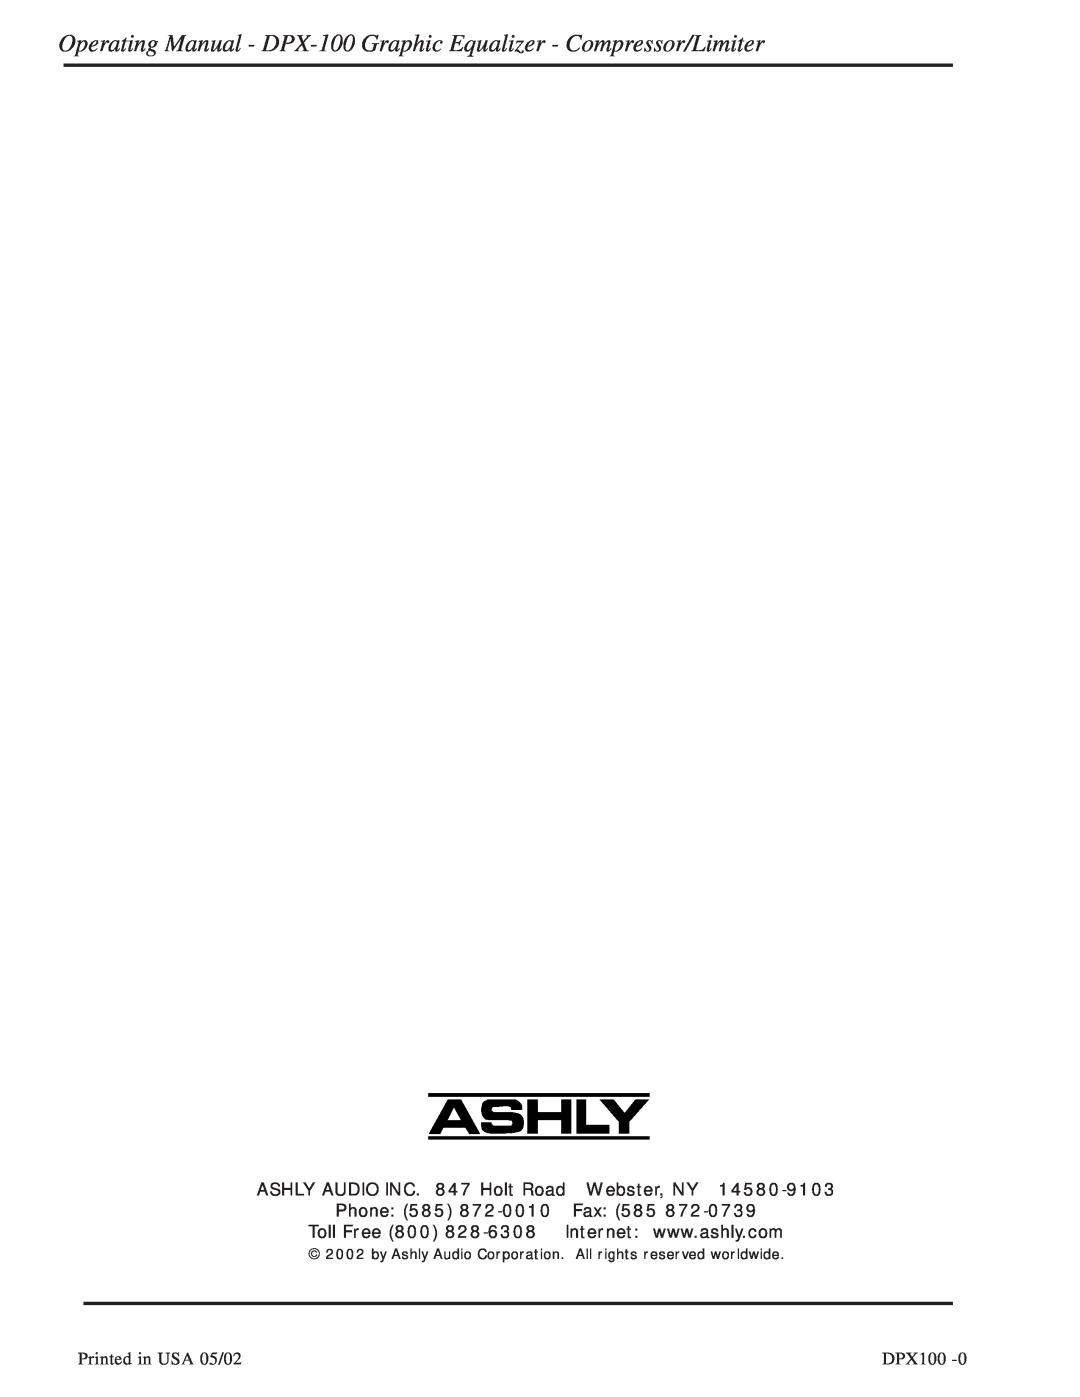 Ashly DPX-100 manual ASHLY AUDIO INC. 847 Holt Road Webster, NY, Phone, Fax, Toll Free 